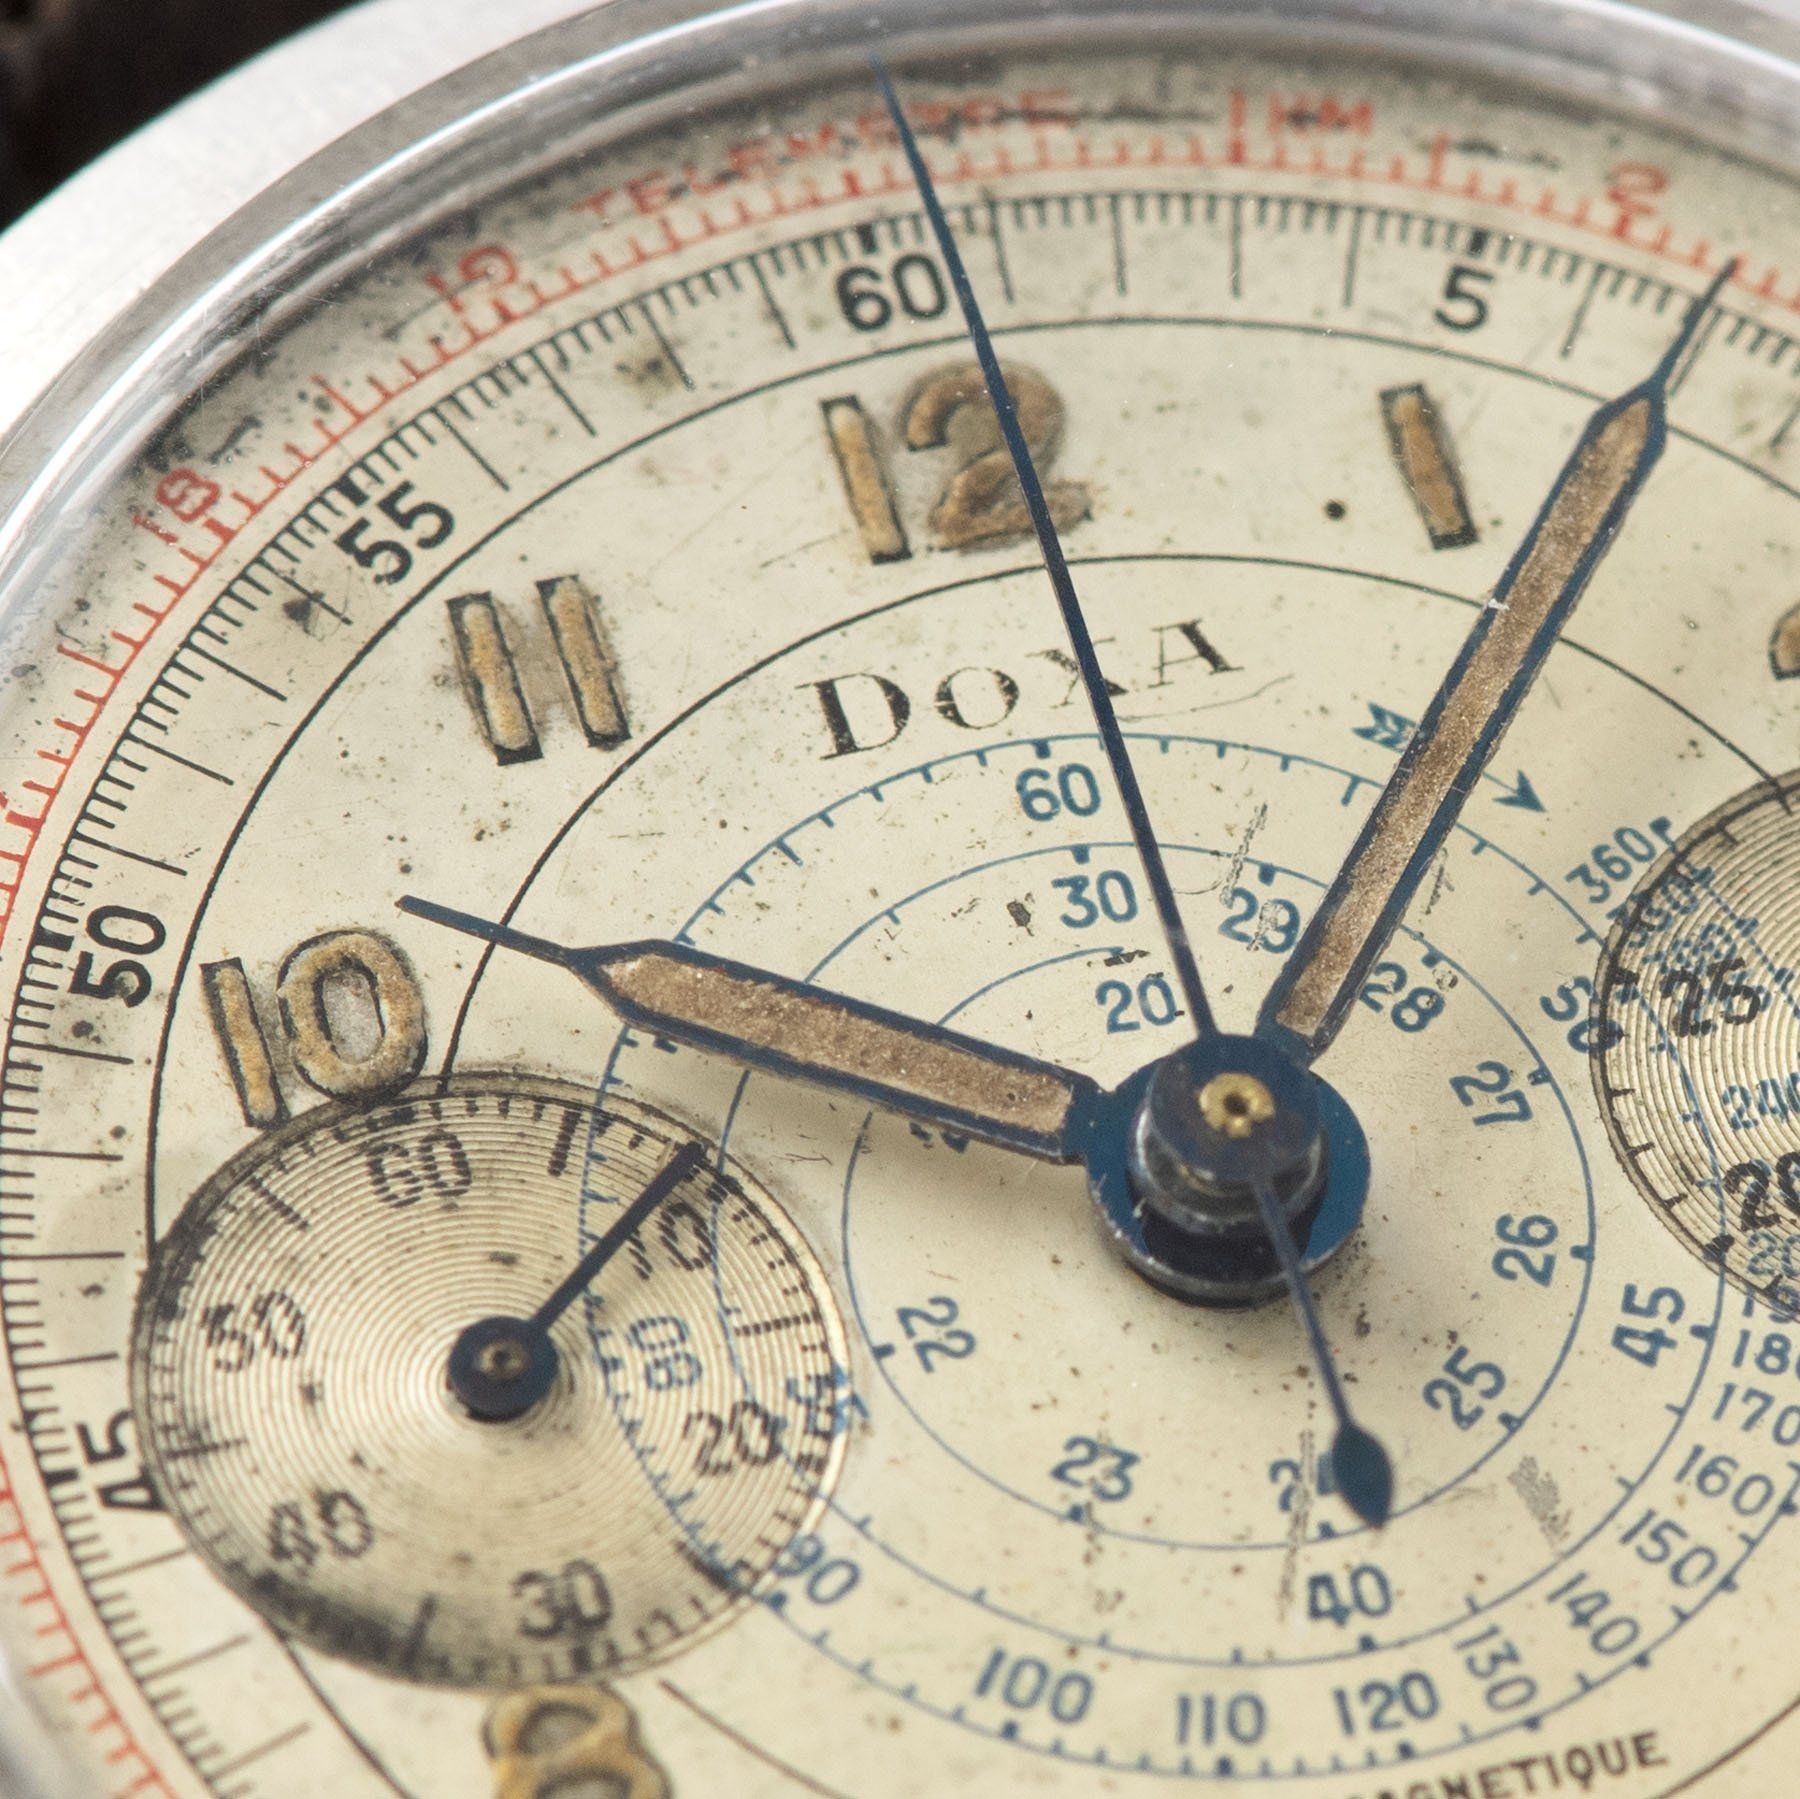 Doxa Multi Scale Steel Spillman Case Chronograph with Blued steel radium-filled syringe hands